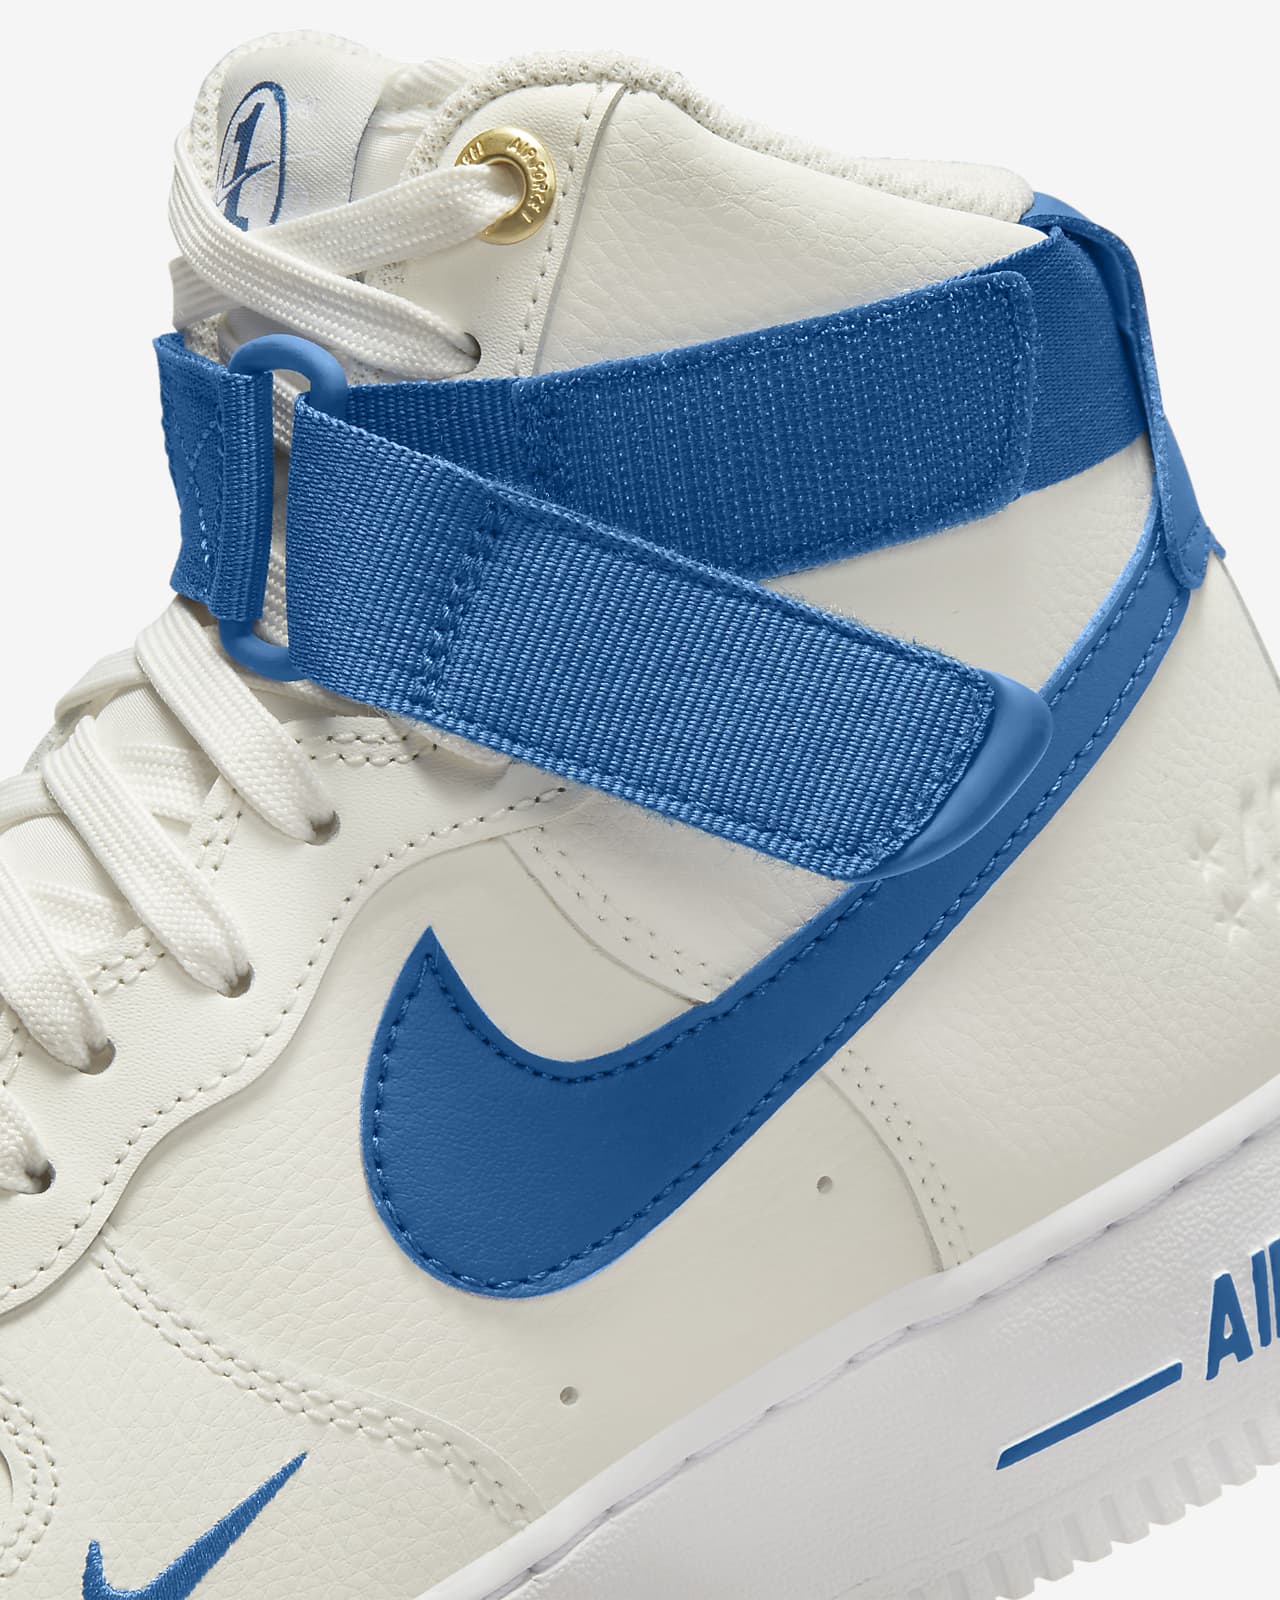 Nike Air Force 1 Mid '07 LV8 'Blue Jay' 7.5